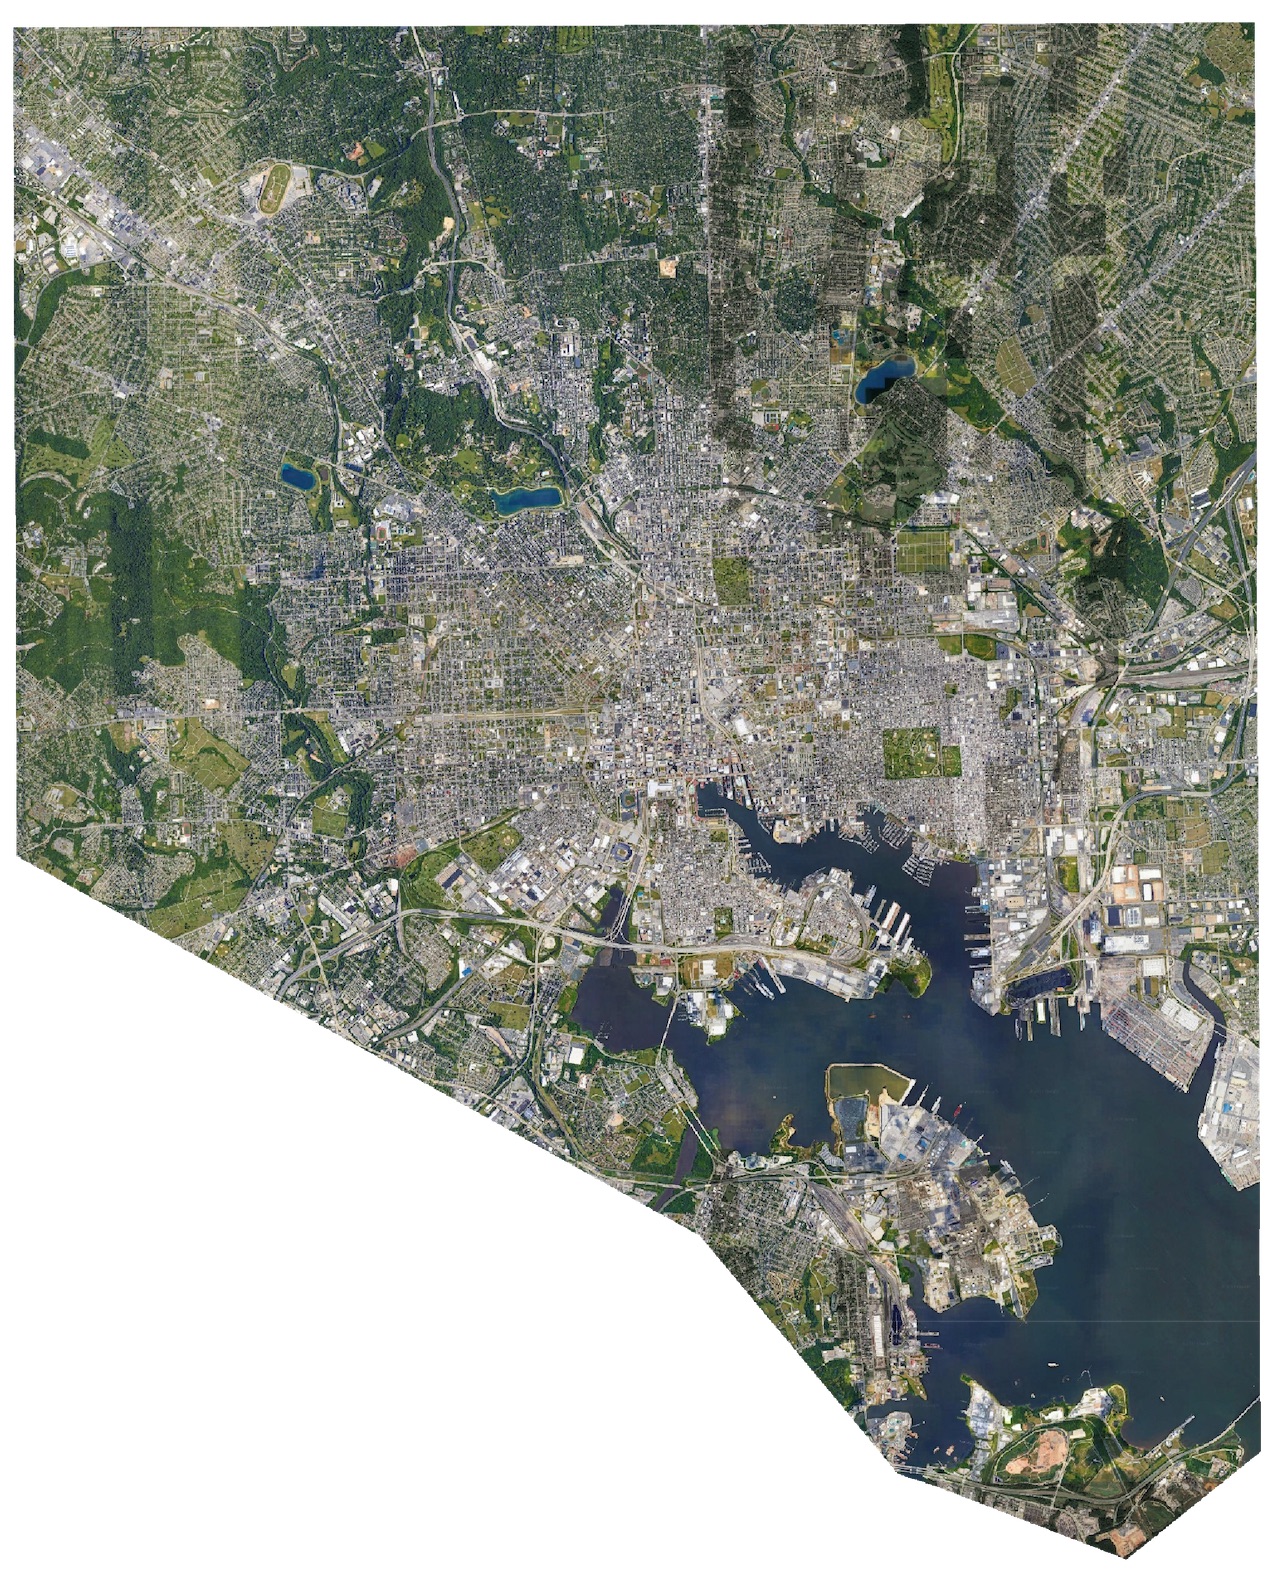 Satellite photo of the Baltimore region showing significantly greener areas in the outskirts of the city